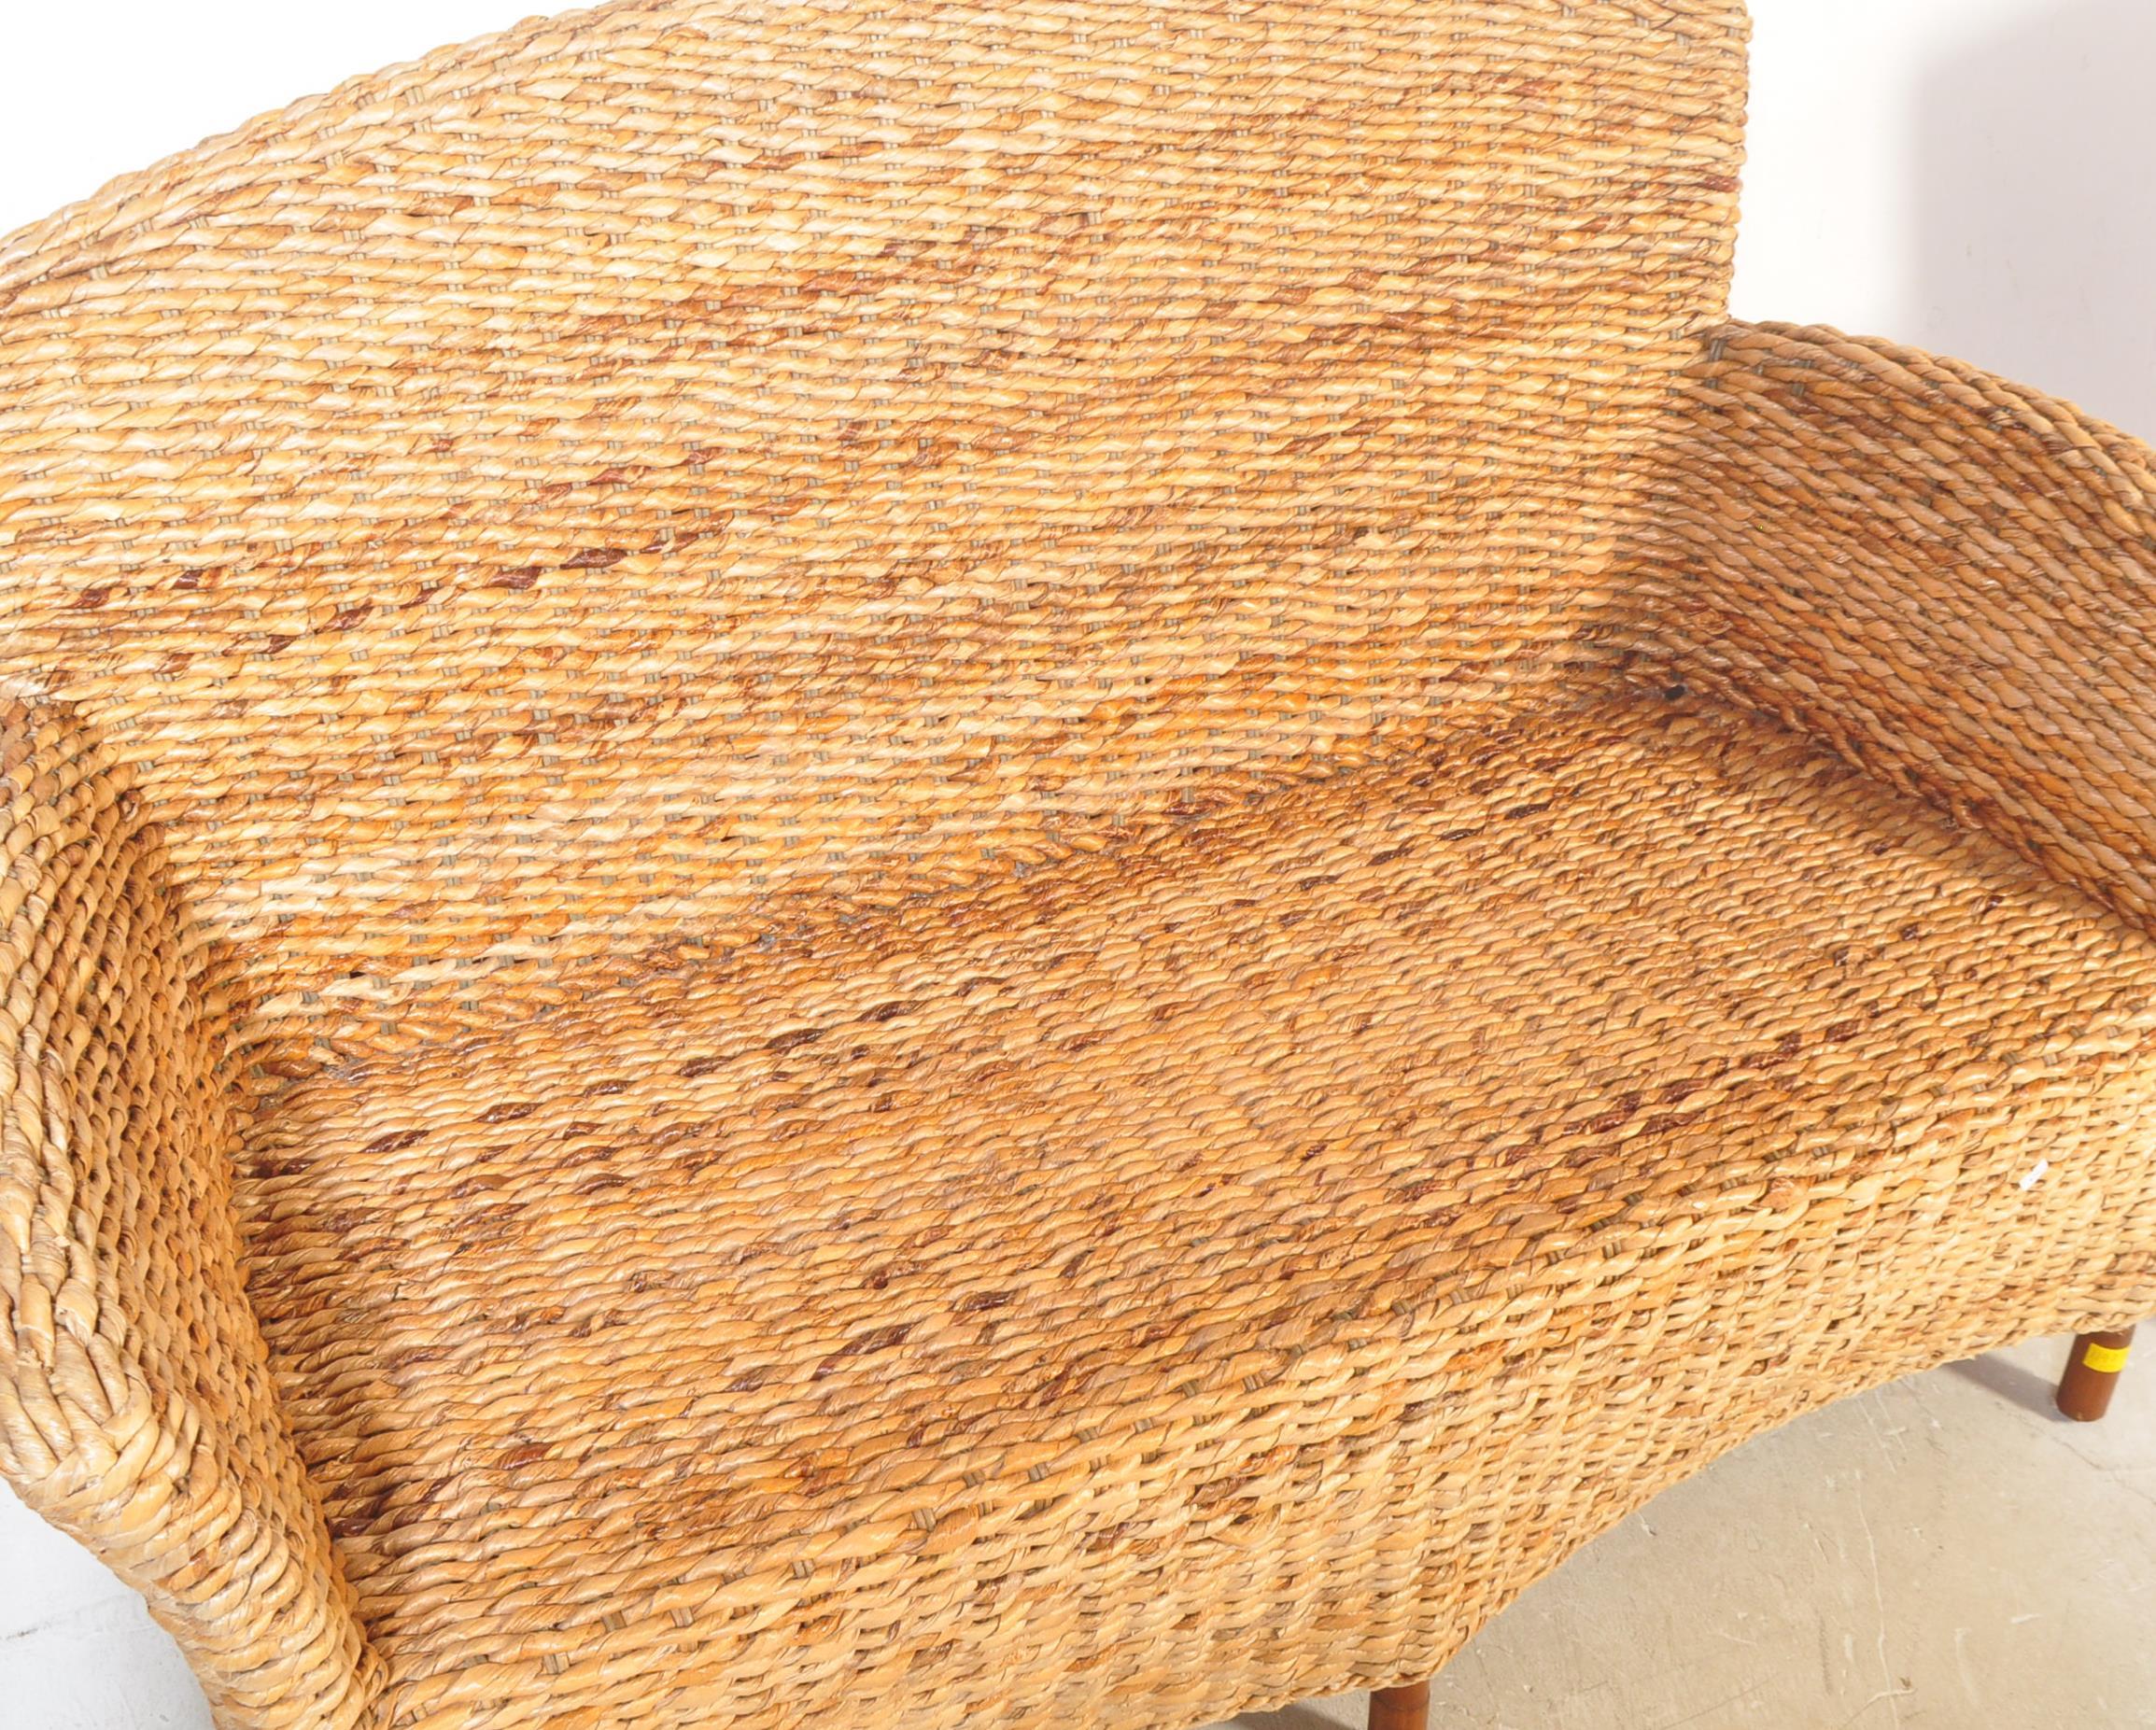 VINTAGE 20TH CENTURY WICKER CONSERVATORY SOFA - Image 4 of 6